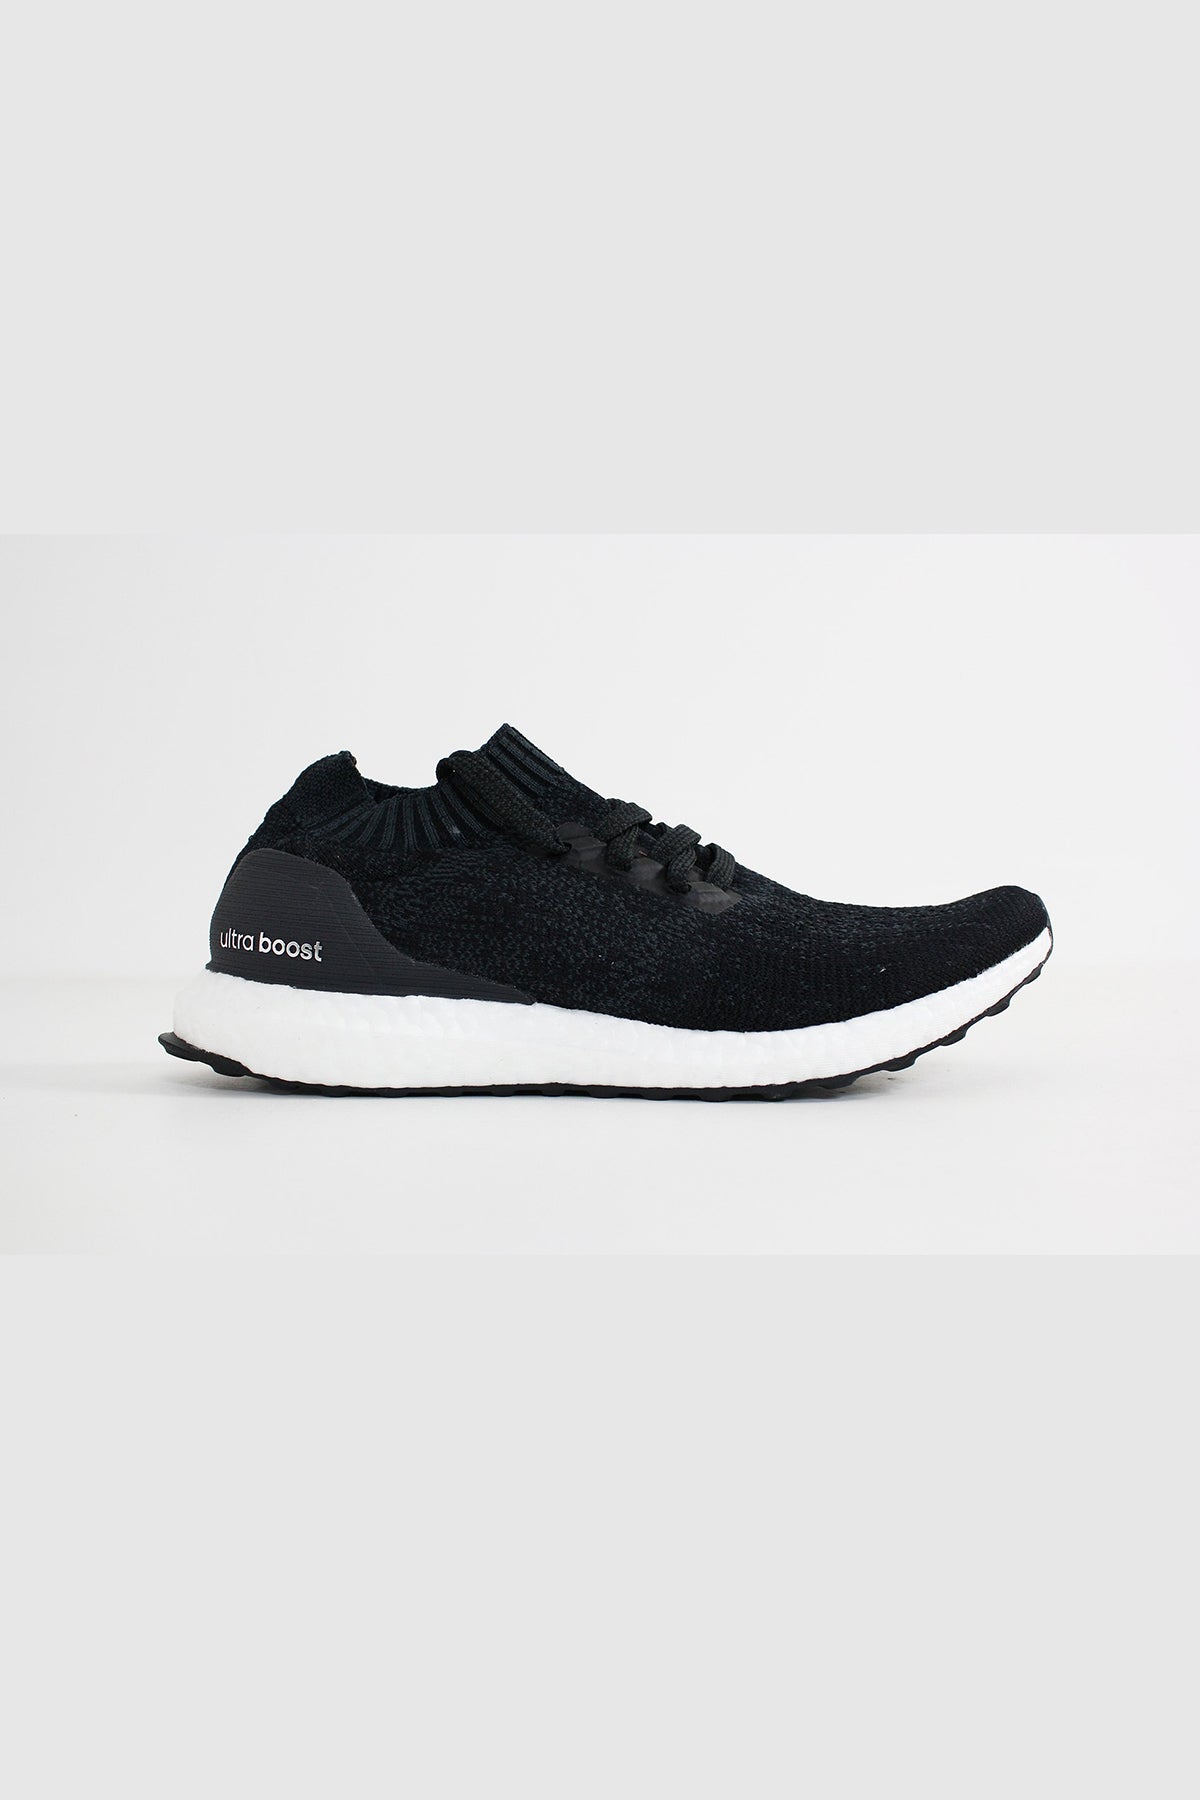 adidas ultra boost uncaged carbon black